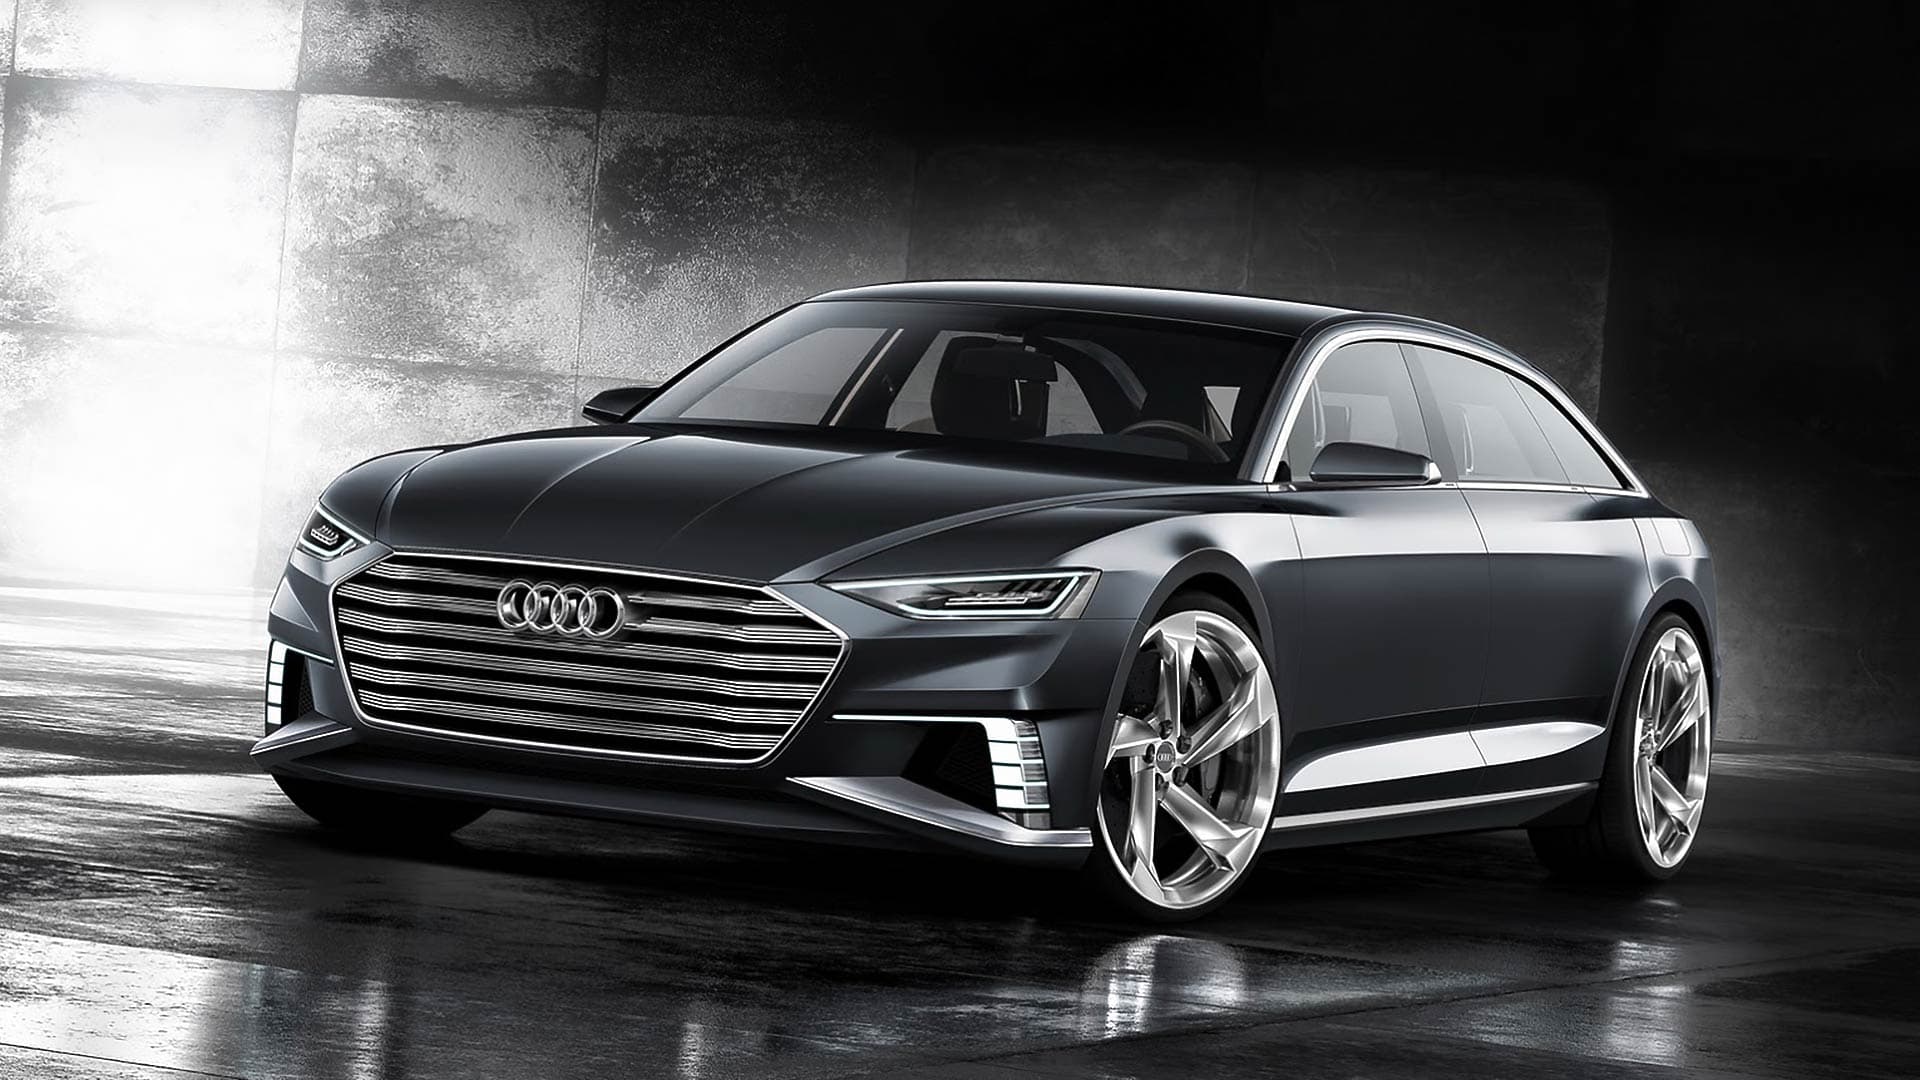 The New Audi A8 Doesn’t Need to Sell